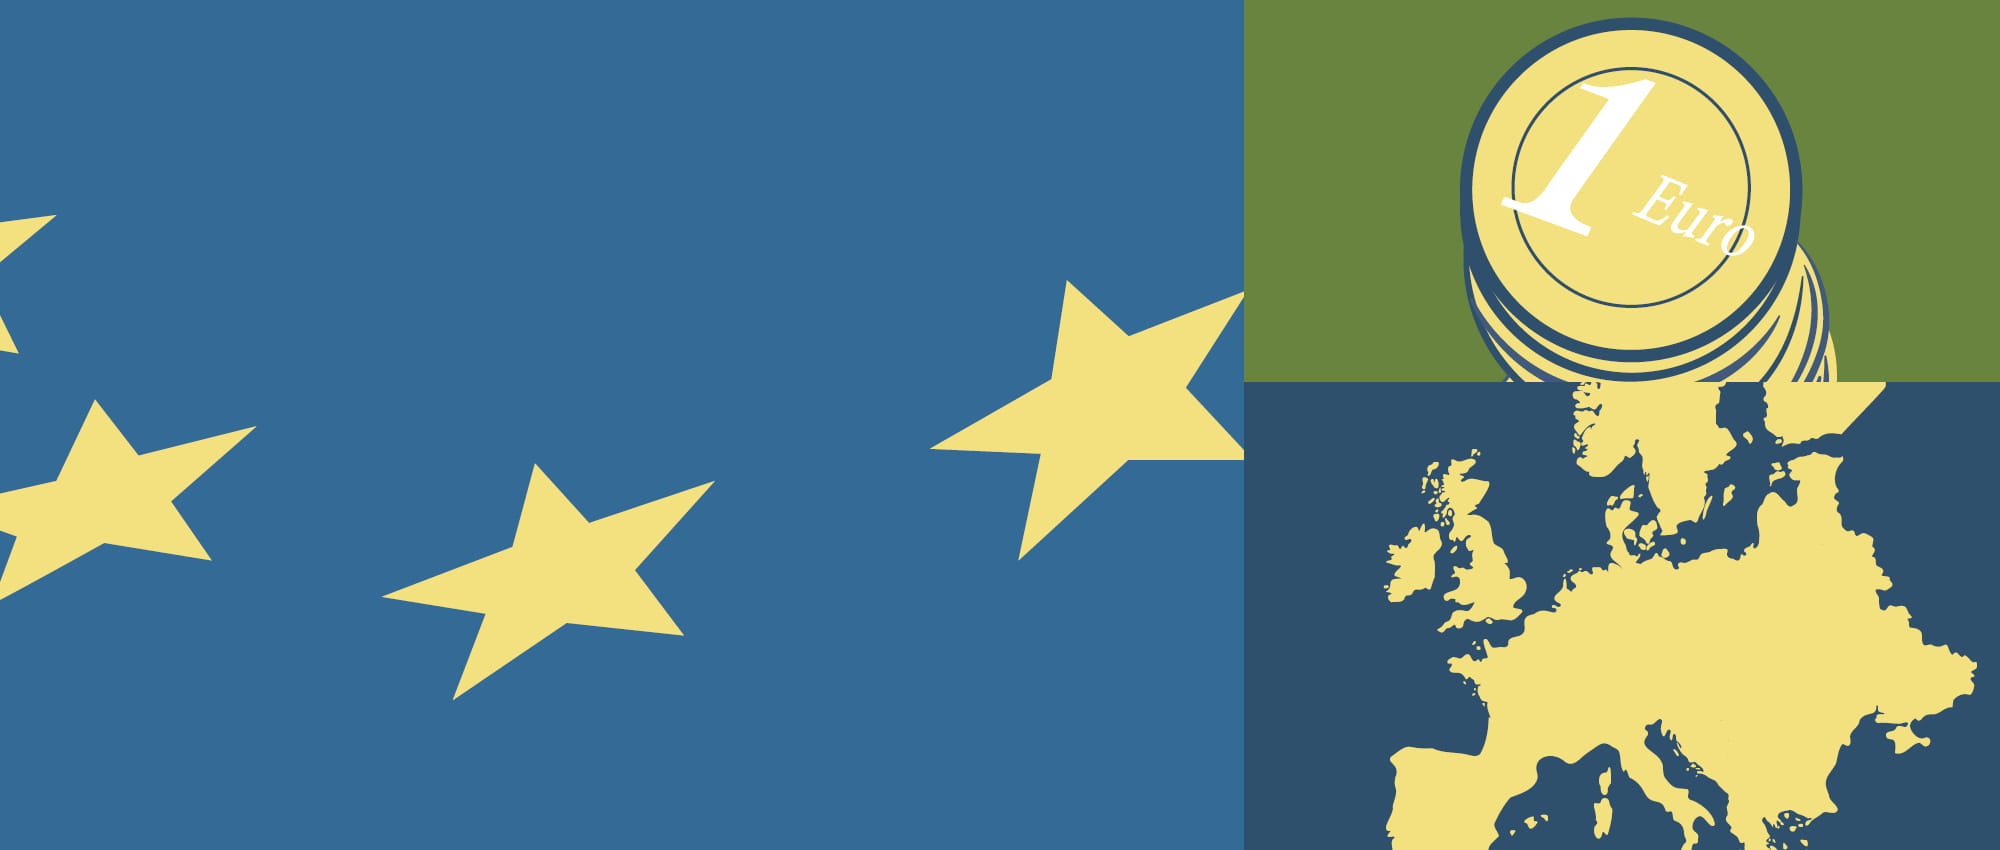 Illustration of the stars of the European Flag, Euro coins and a map of Europe.